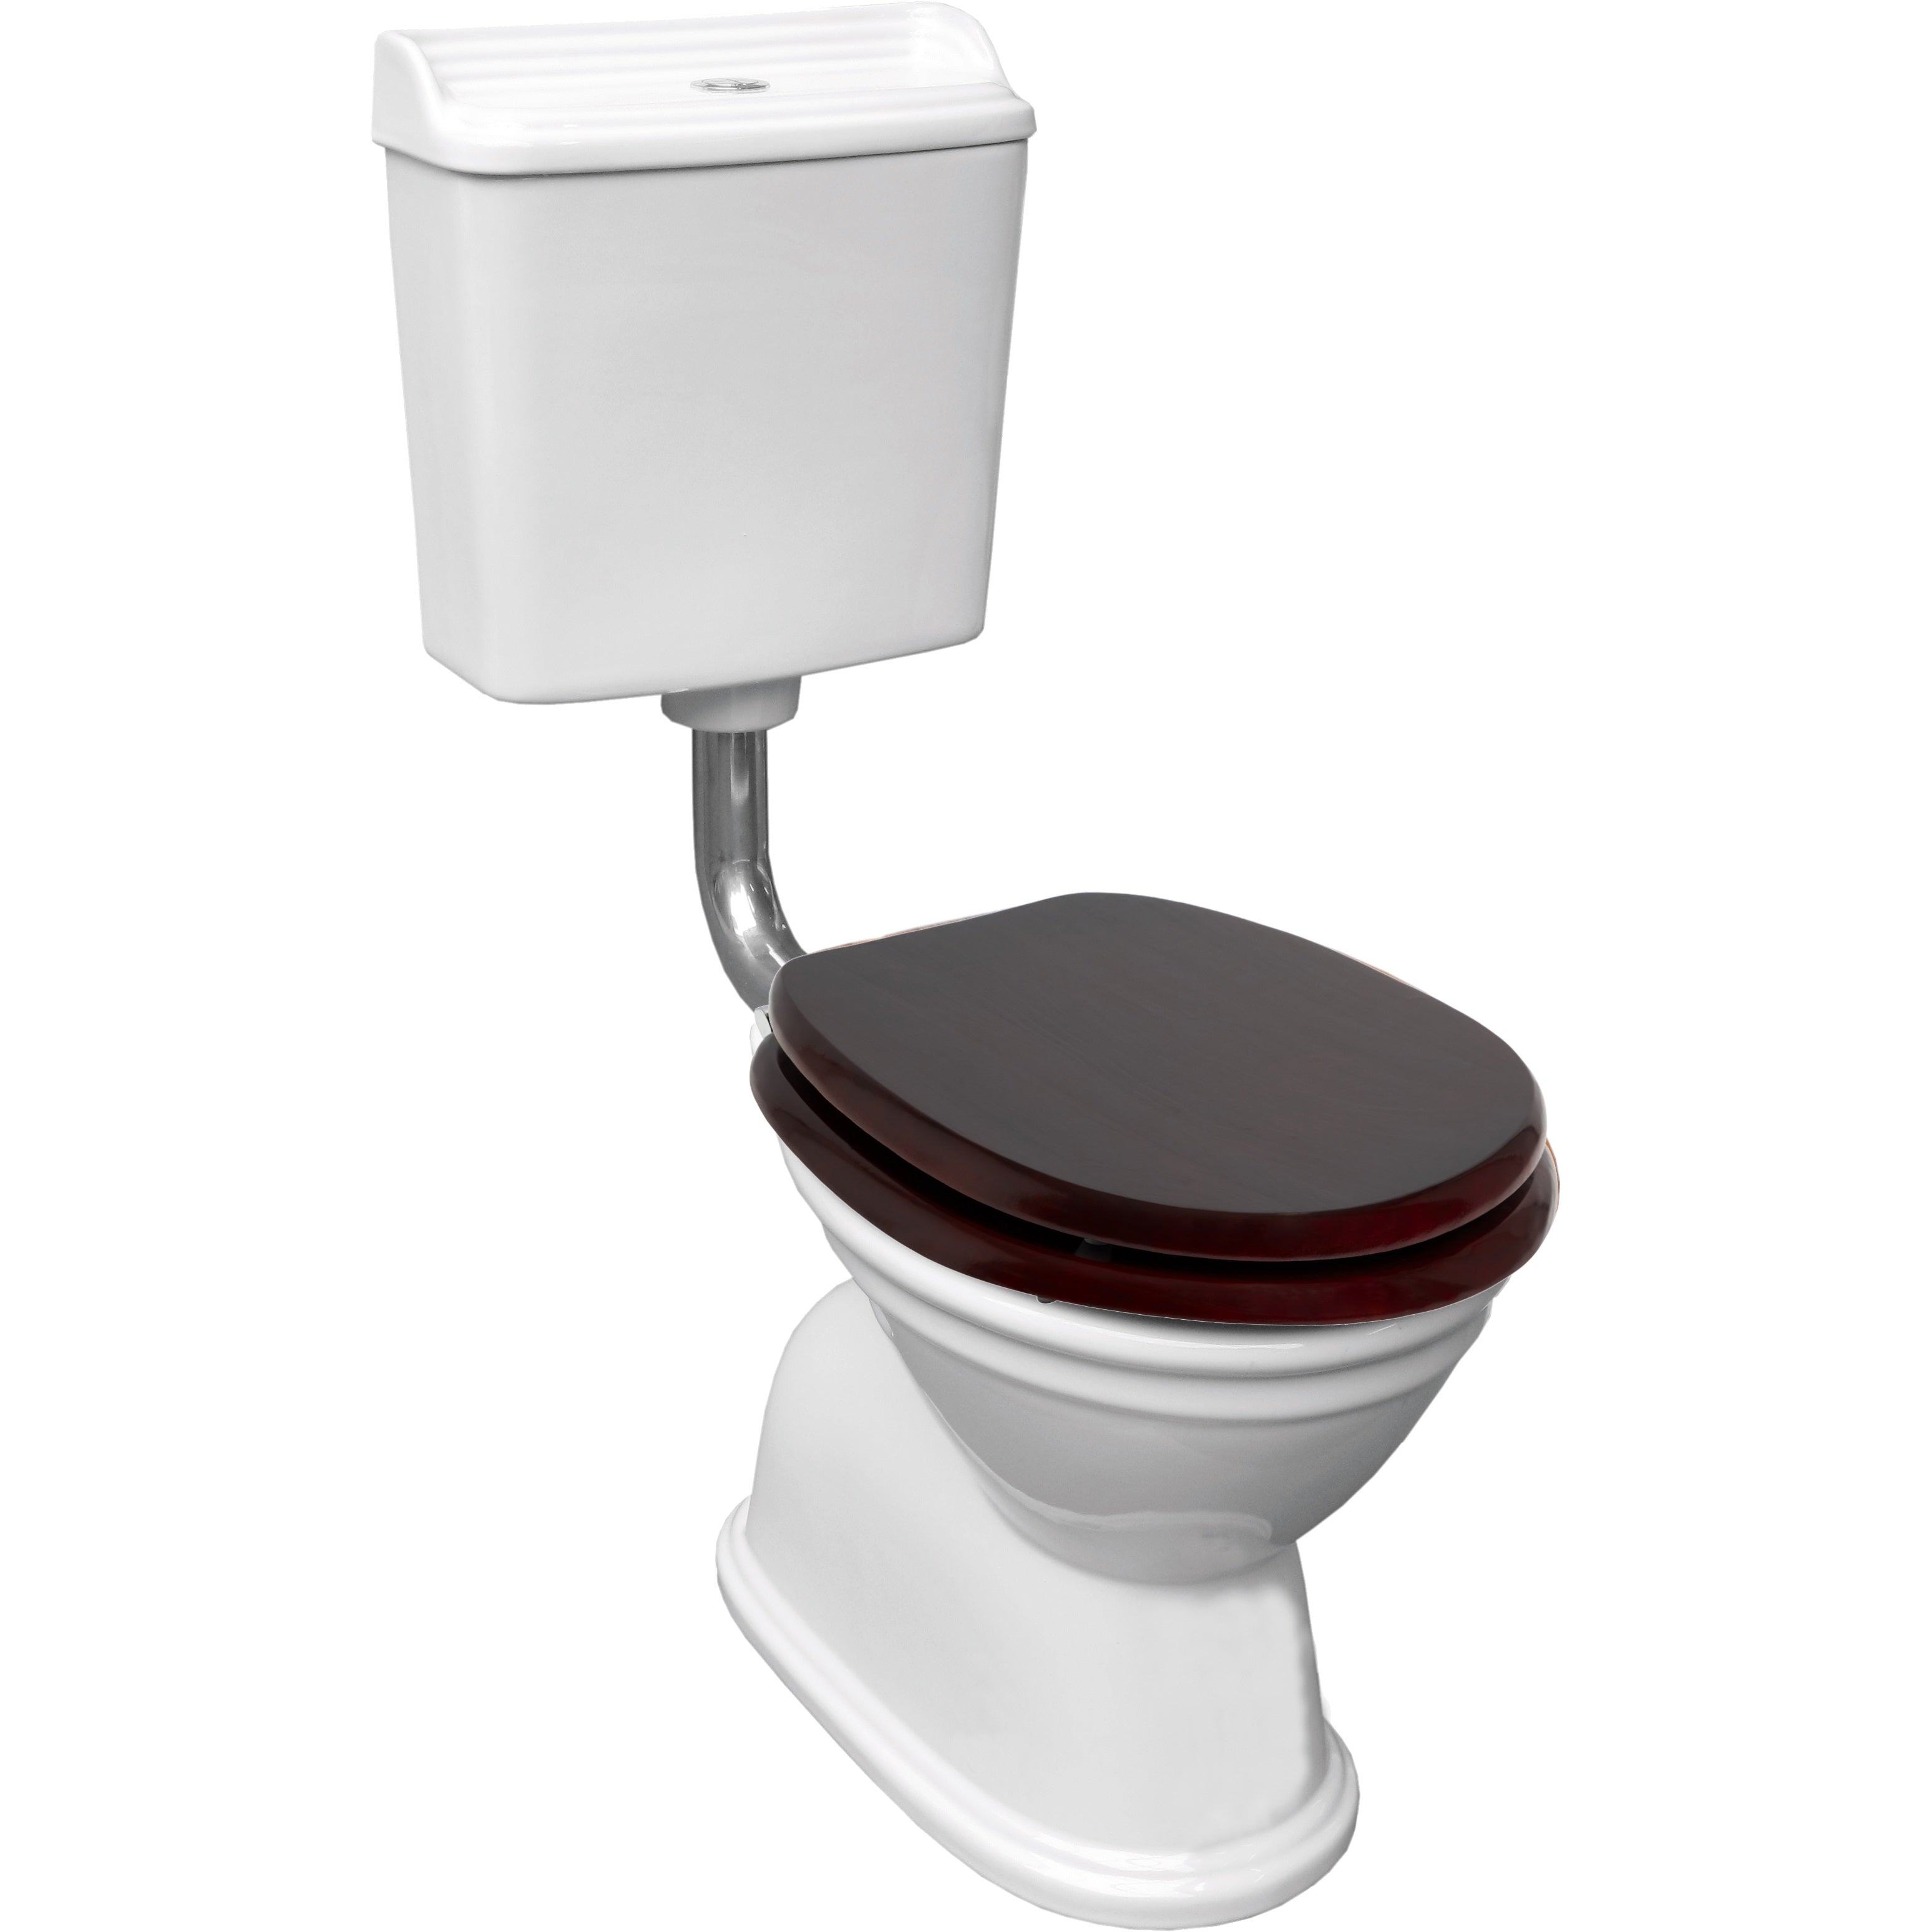 JOHNSON SUISSE COLONIAL FEATURE TOILET GLOSS WHITE